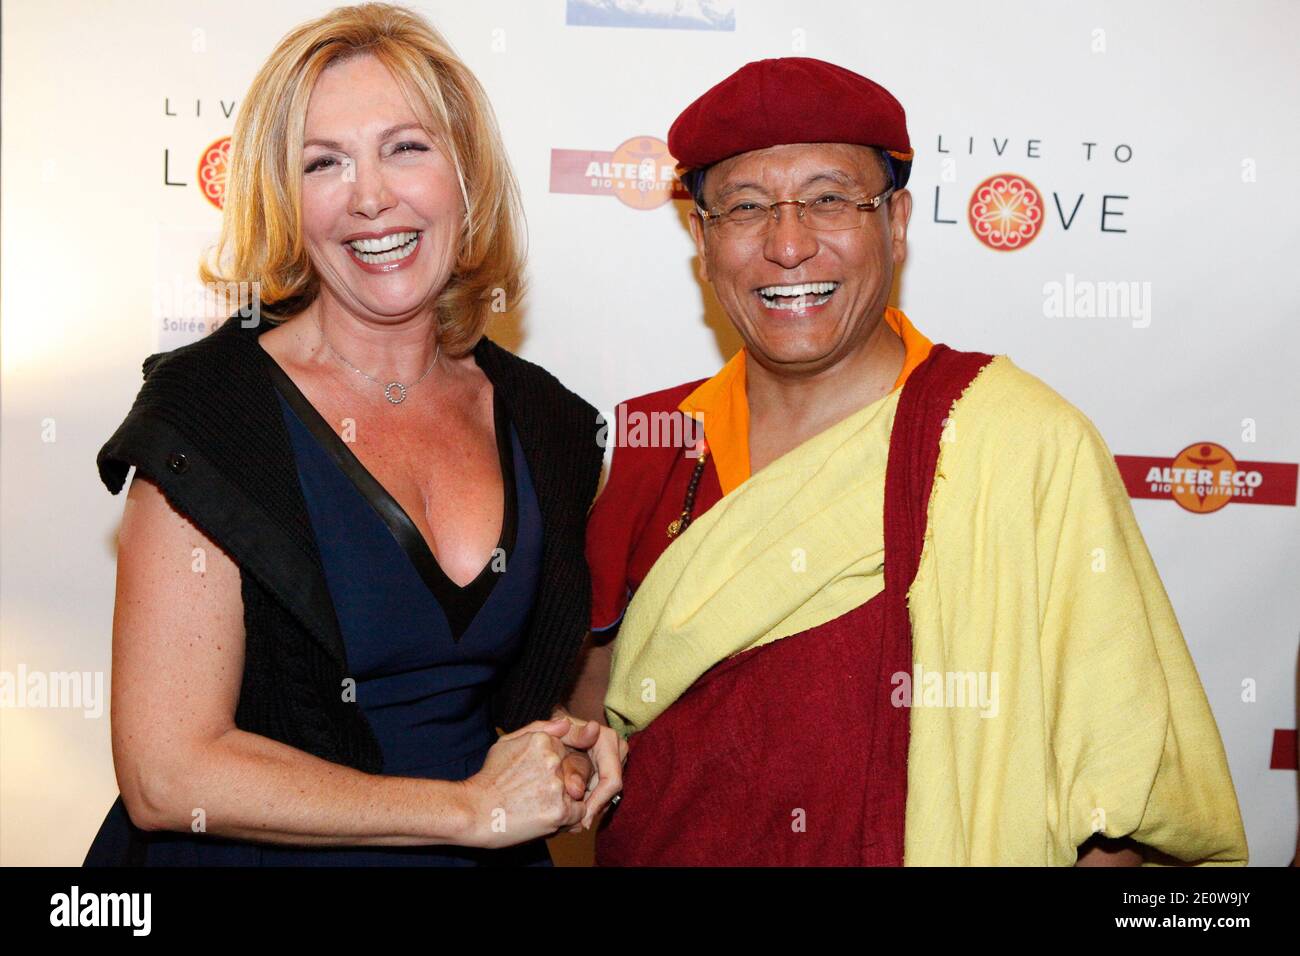 Fabienne Amiach and The Gyalwang Drukpa at the Gala of Charity 'La Sagesse Au Feminim' by Drukpa Humanitaire held at Hotel Lutetia, in Paris, France, on November 14, 2012. Photo by Audrey Poree/ABACAPRESS.COM Stock Photo